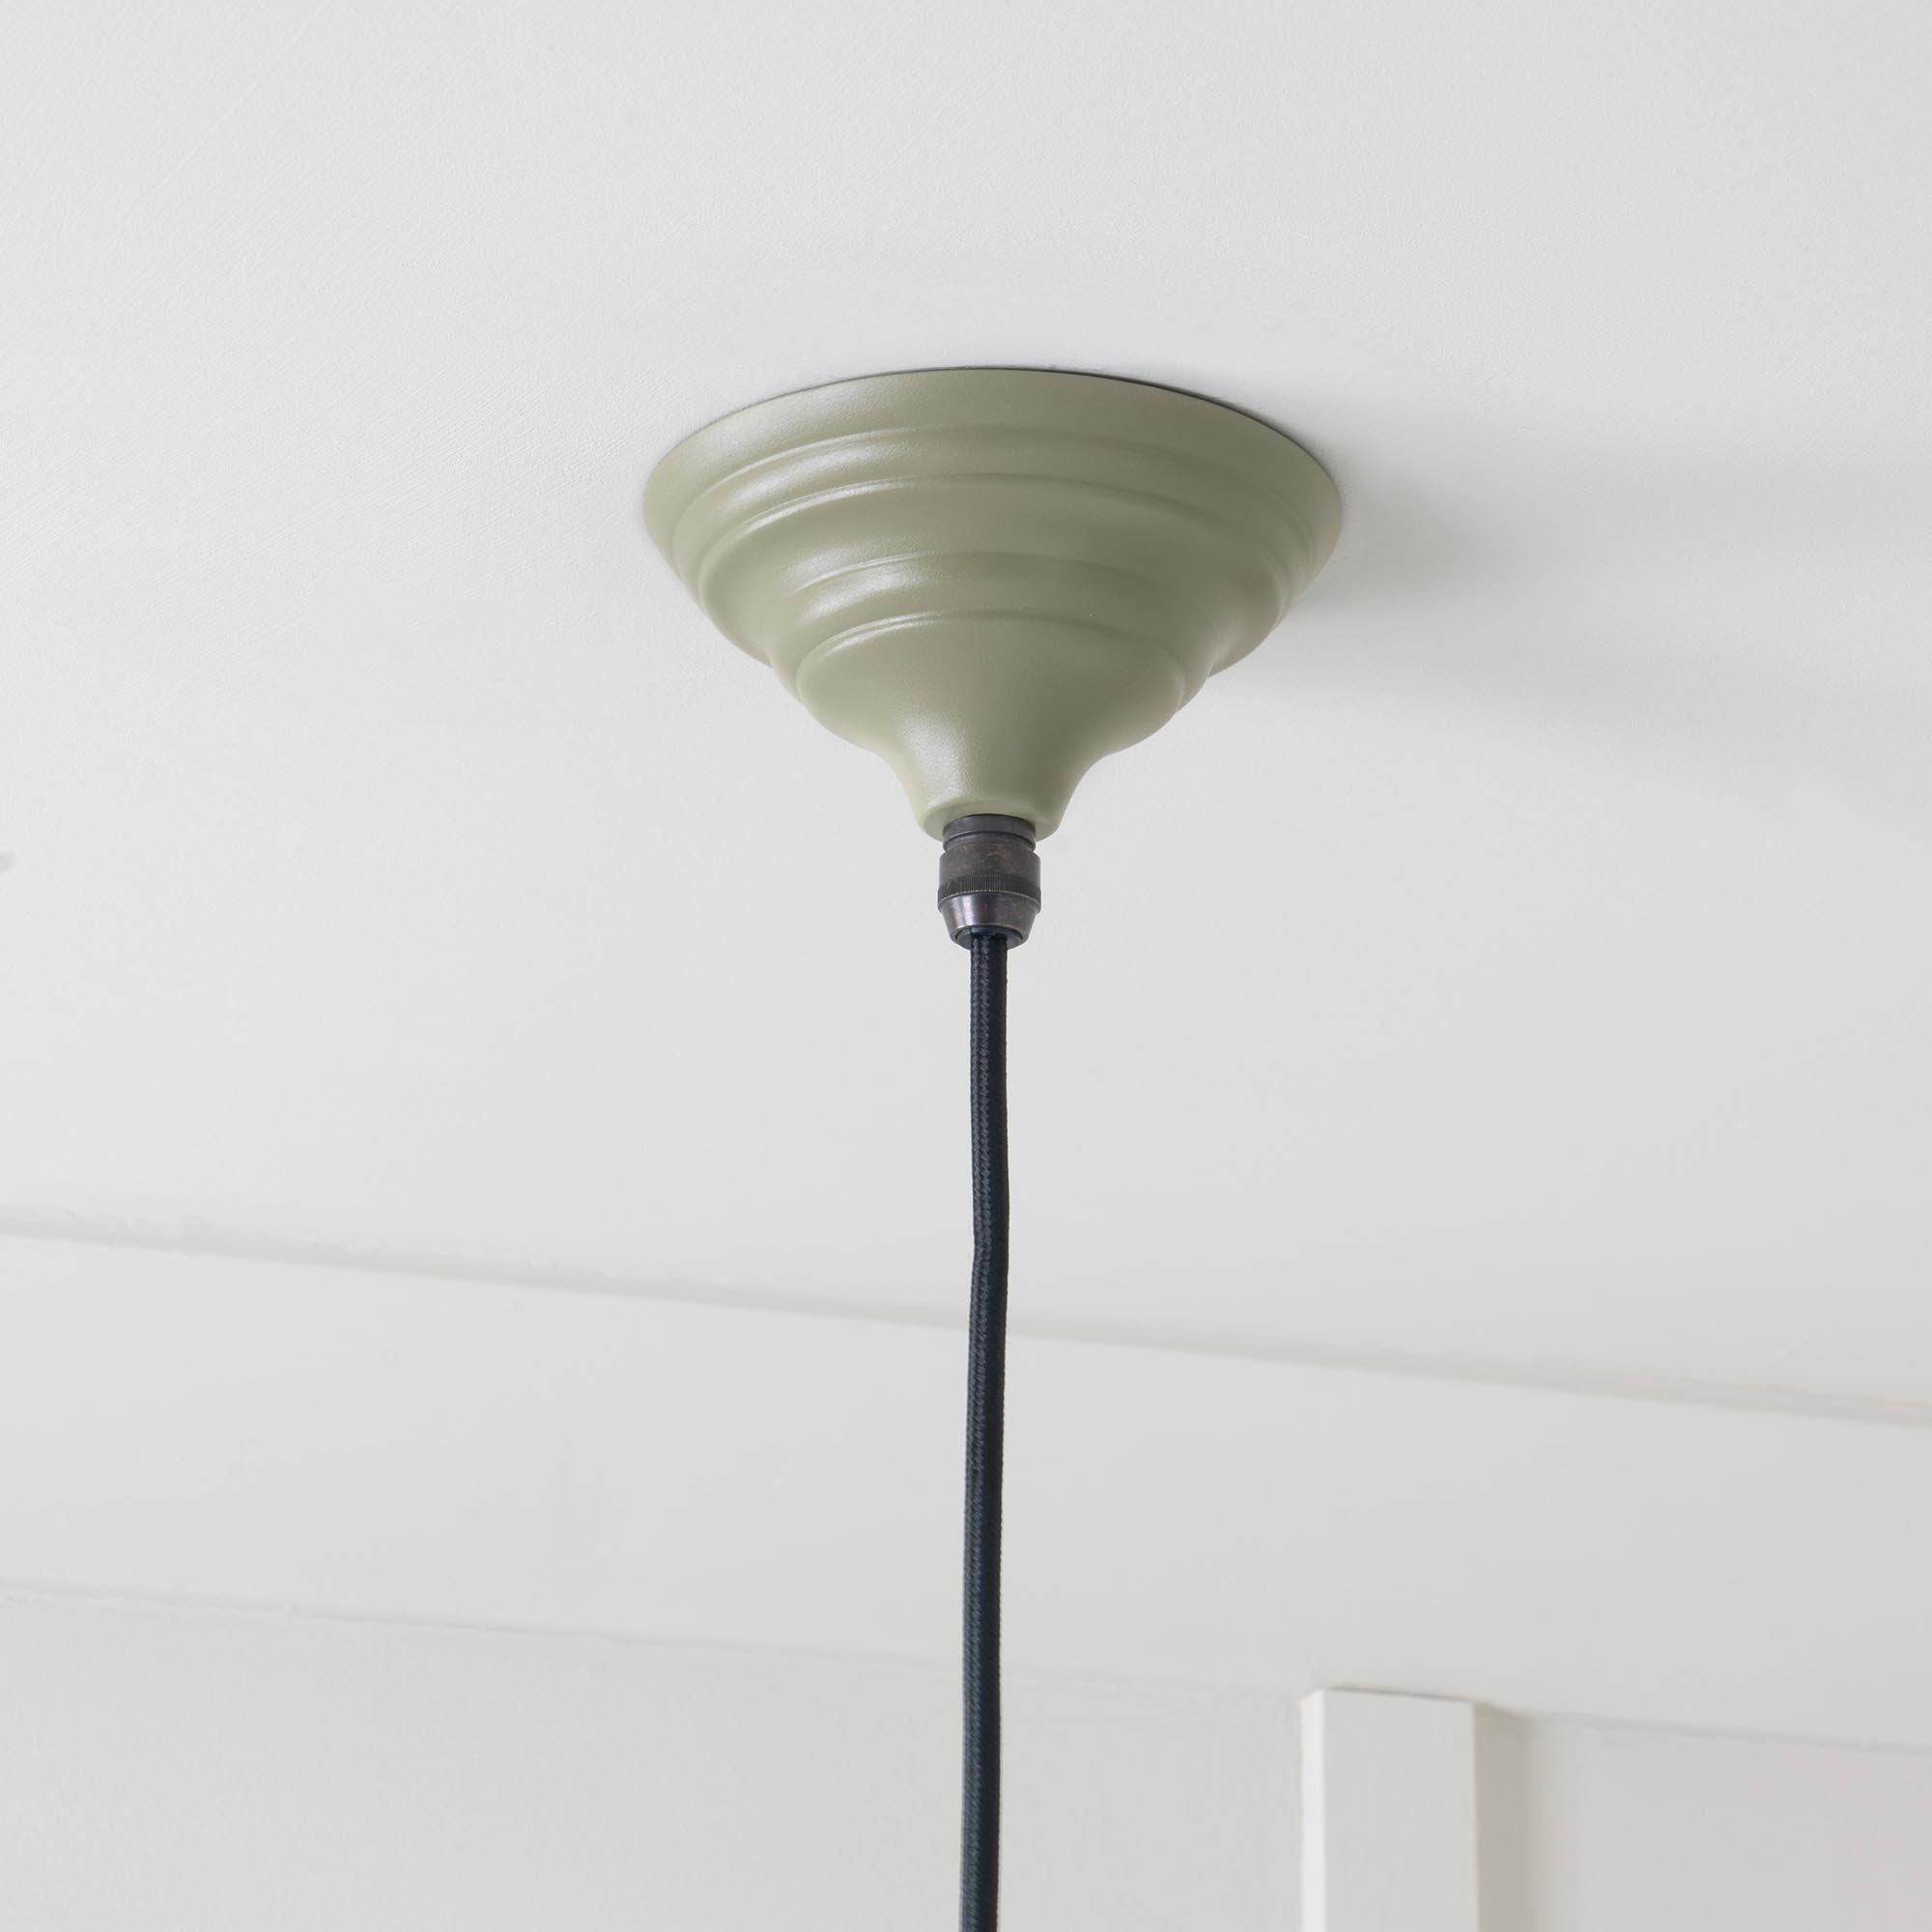 SHOW Close Up Image of Ceiling Rose For Harborne Ceiling Light in Tump